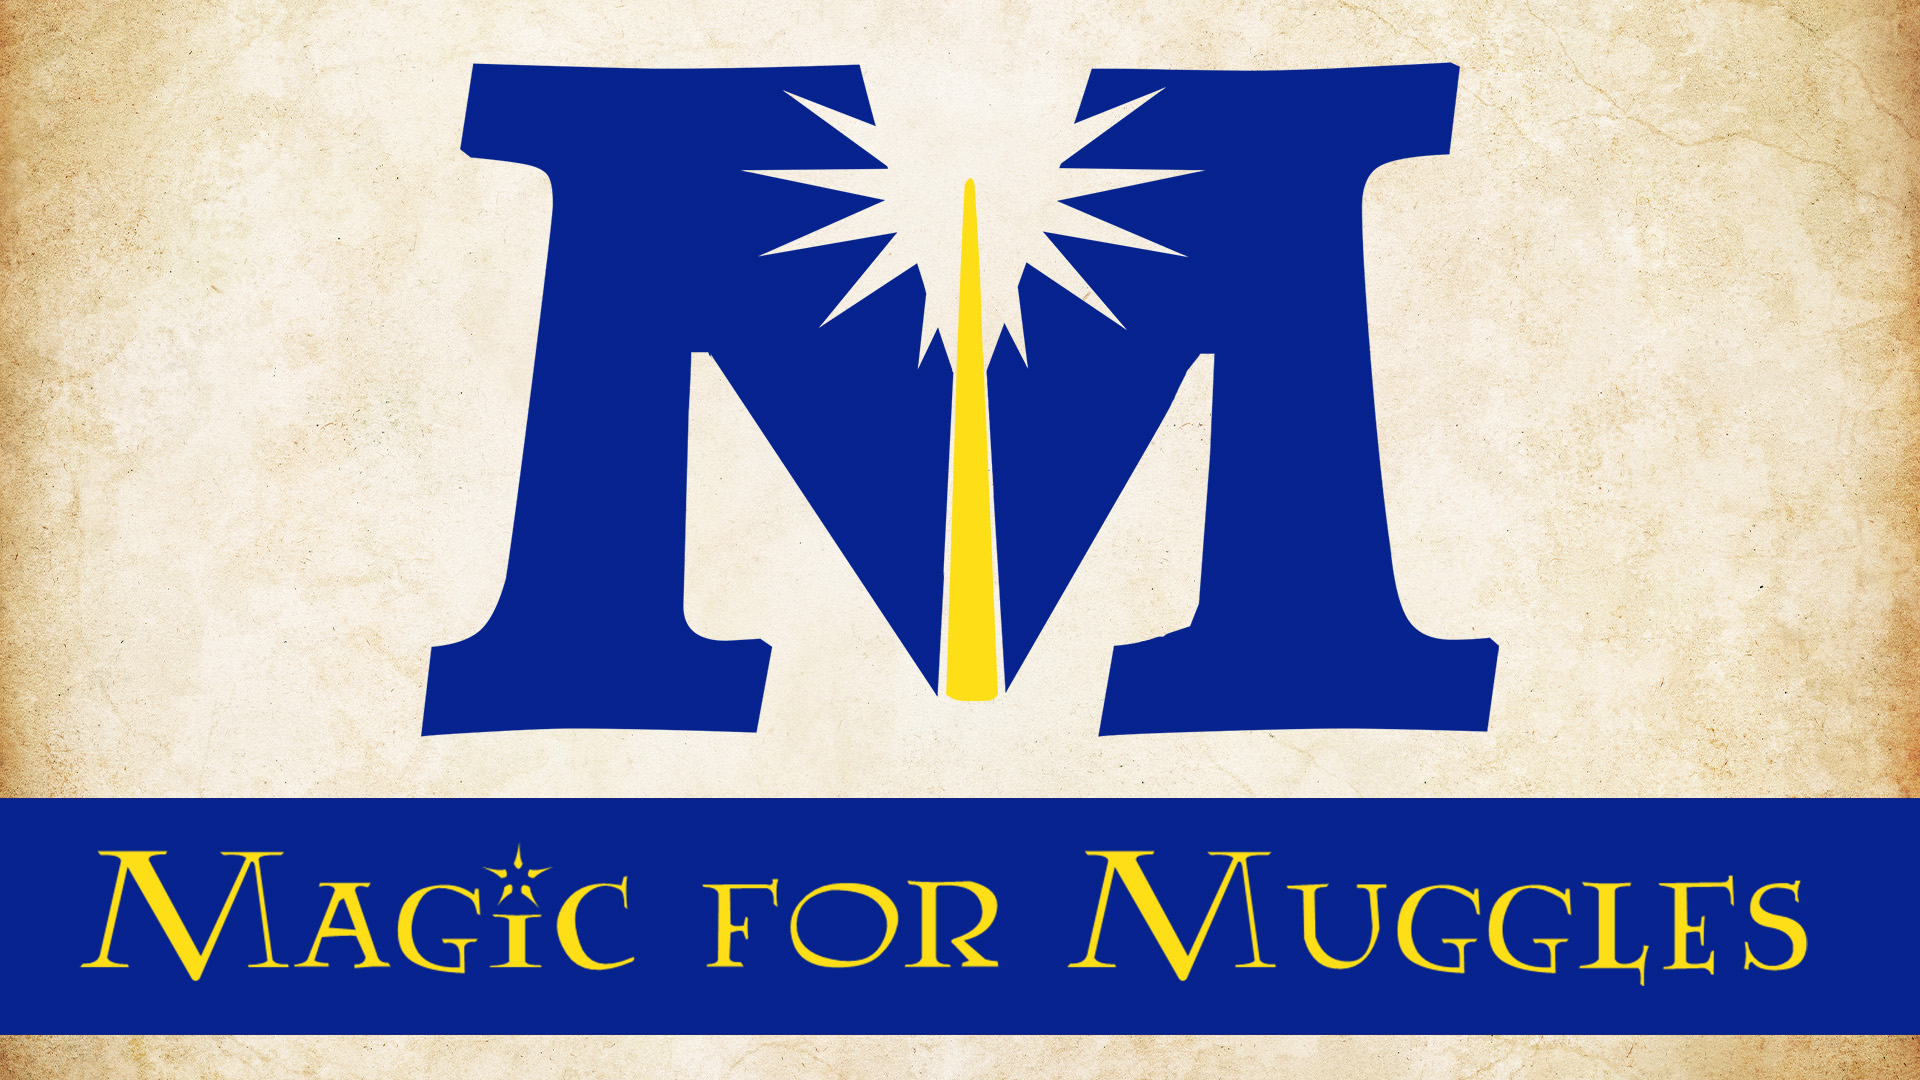 Image shows a royal blue "M" in a serif font on top of a parchment background. A glowing yellow wand rests in the center of the "M," and beneath there is a royal blue bar with the words "Magic for Muggles" in a yellow decorative font.